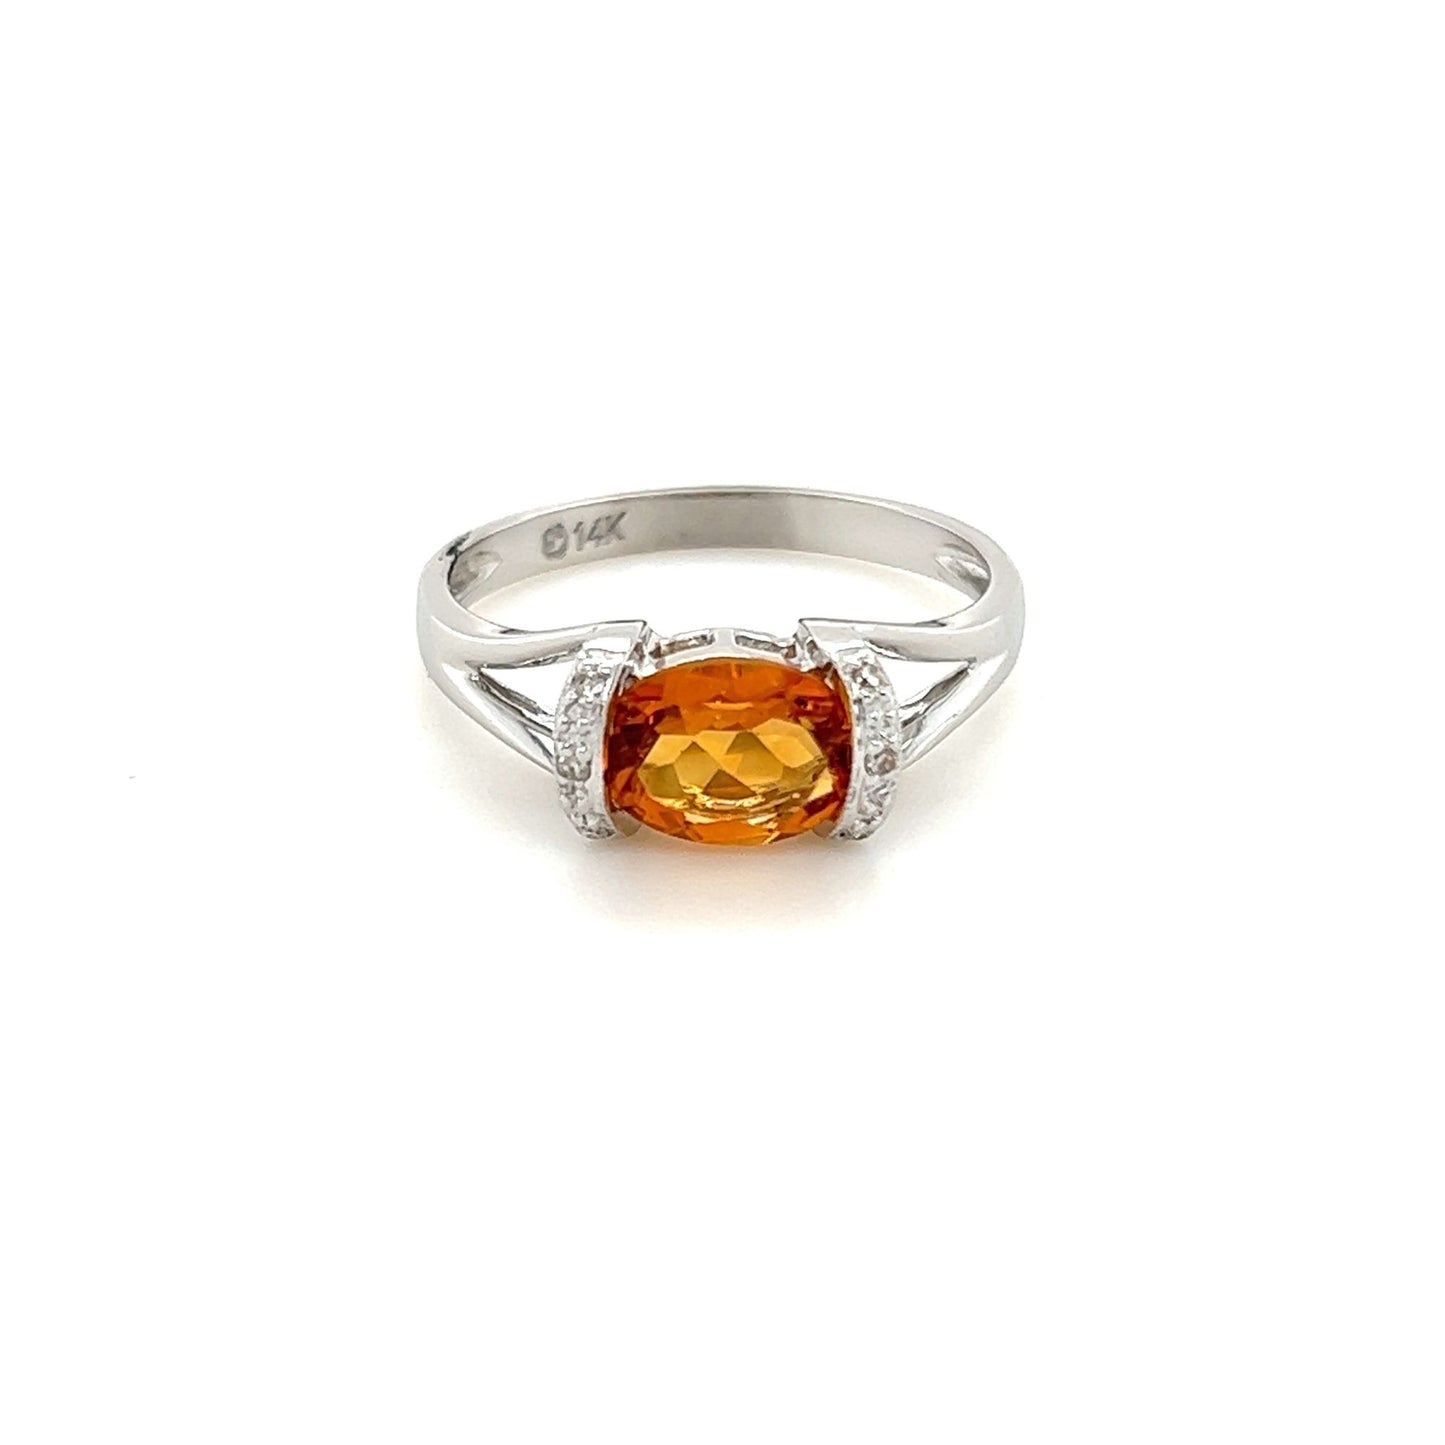 14kt White Gold Oval Cut Citrine Ring w/ Diamond Accents